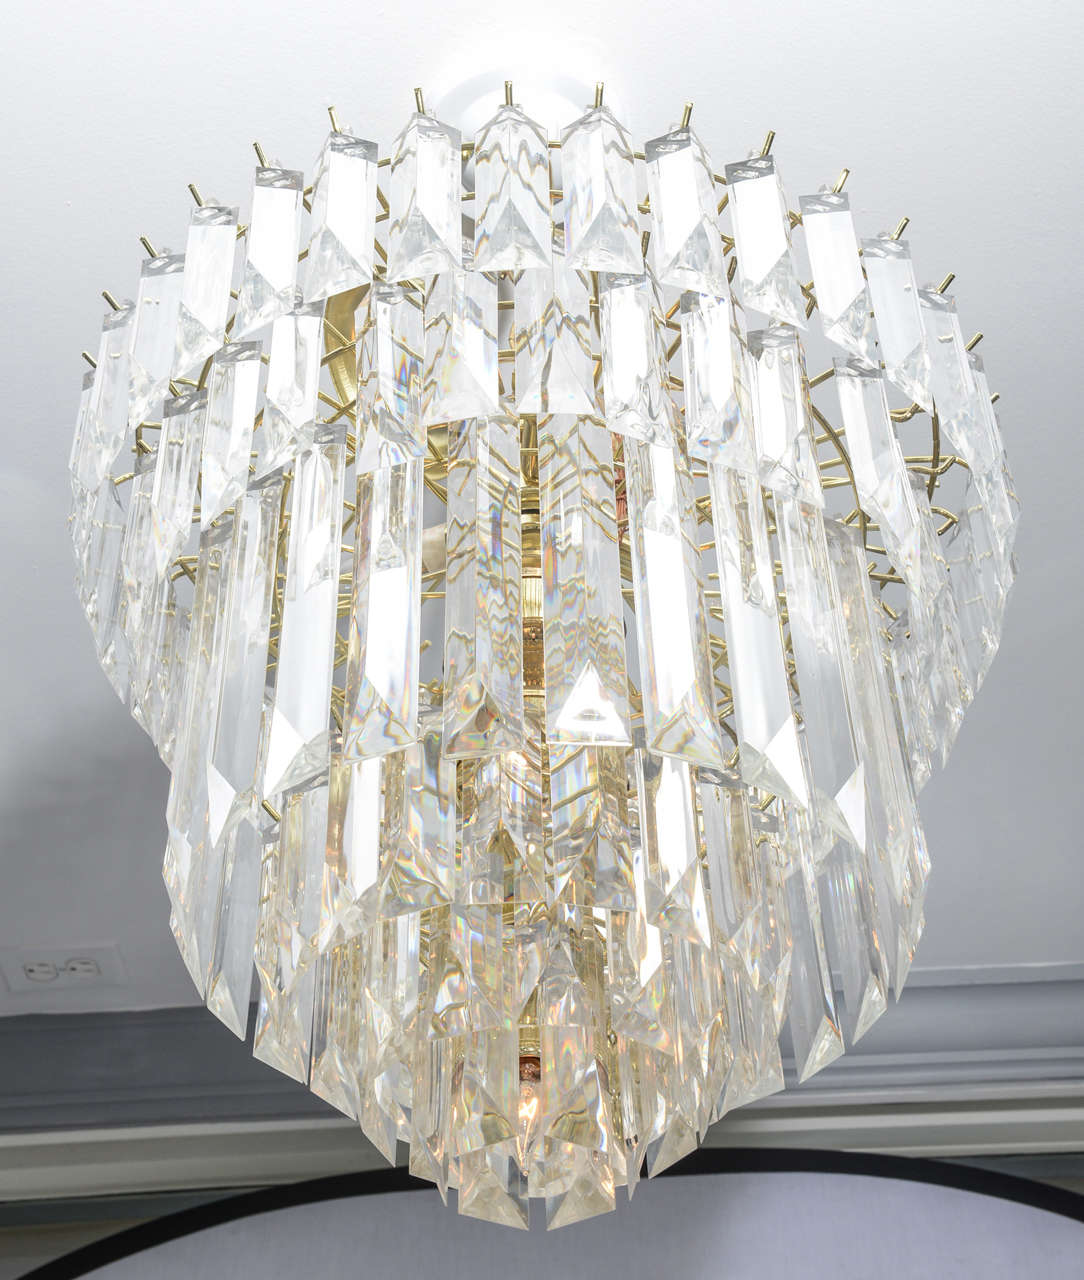 All removable Lucite prisms, eight light-chandelier.